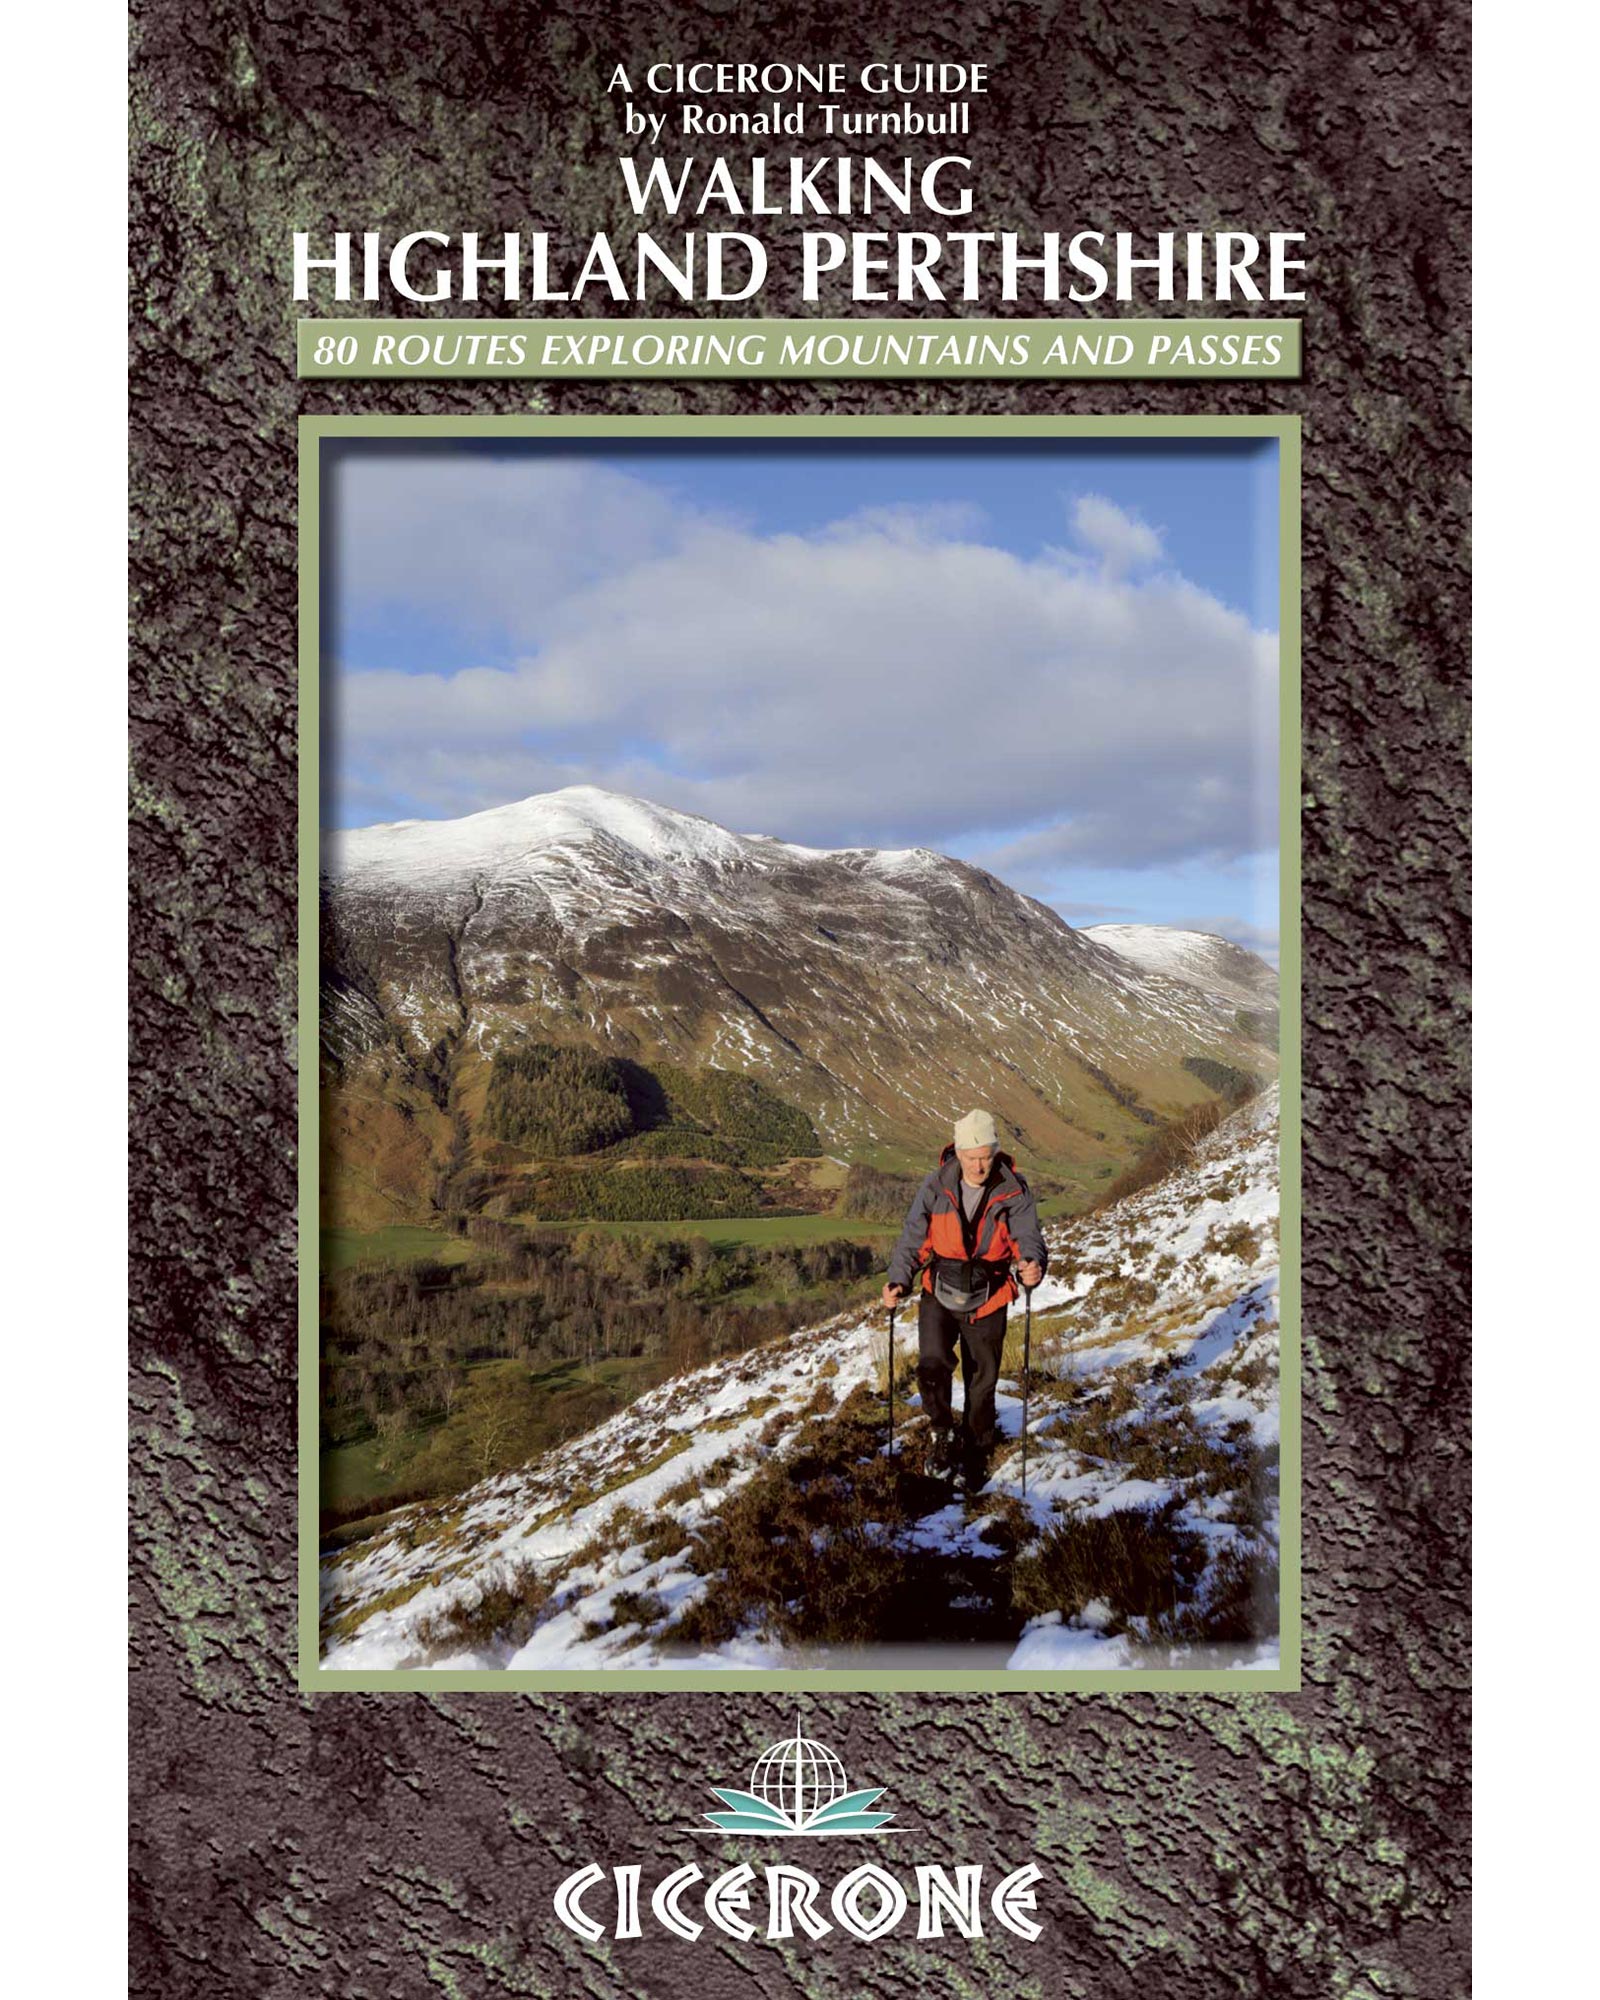 Cicerone Walking Highland Perthshire Guide Book